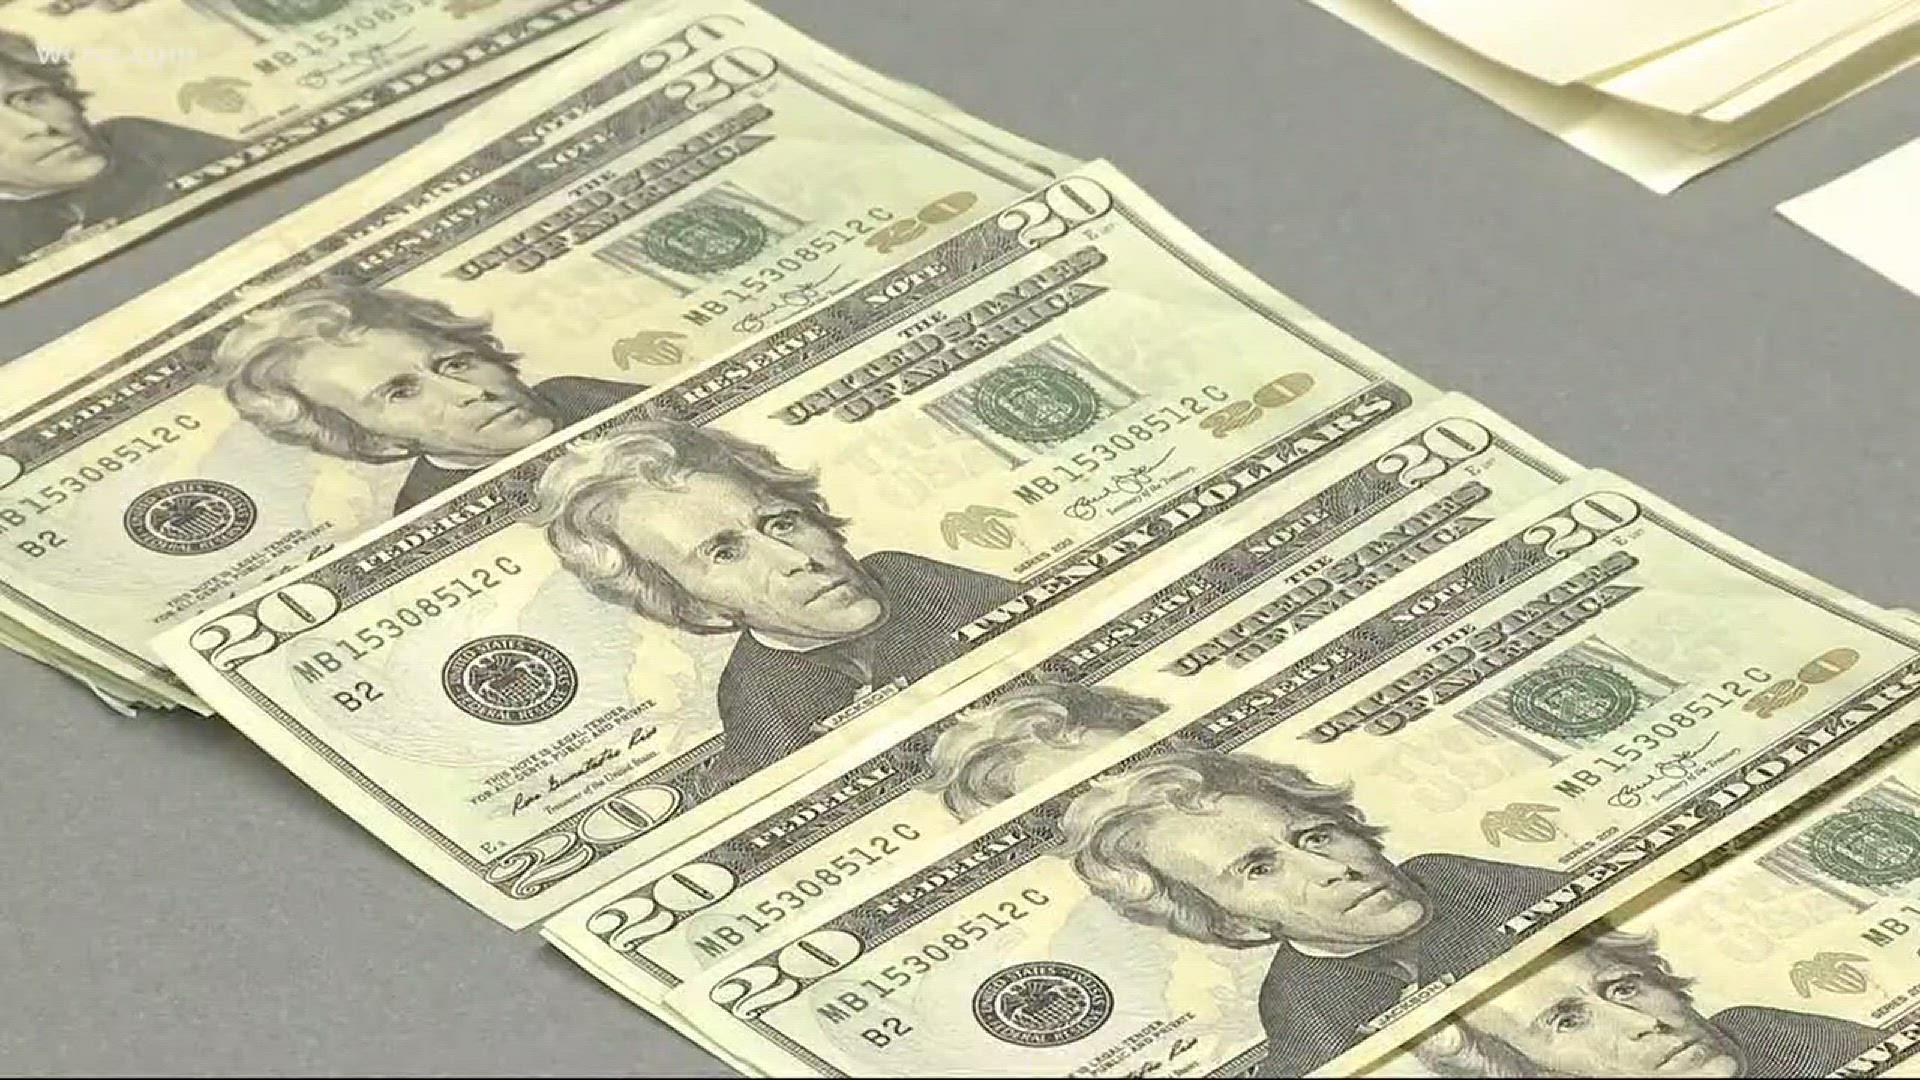 Police departments throughout the Charlotte region continue to find cases of people using counterfeit money.